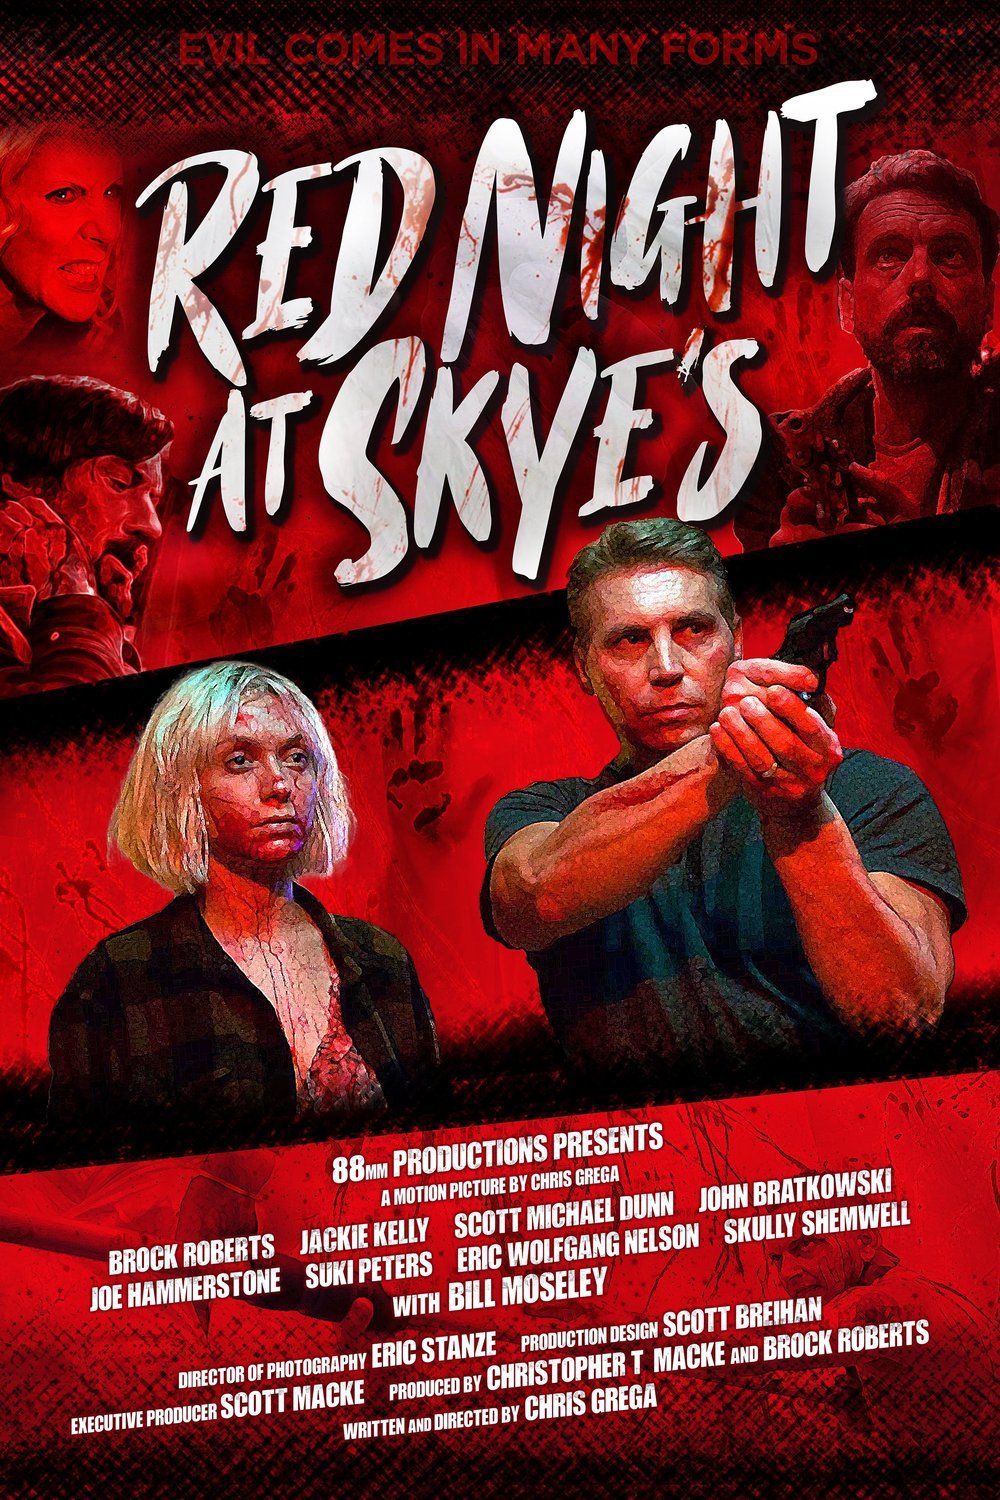 Poster of the movie Red Night at Skye's